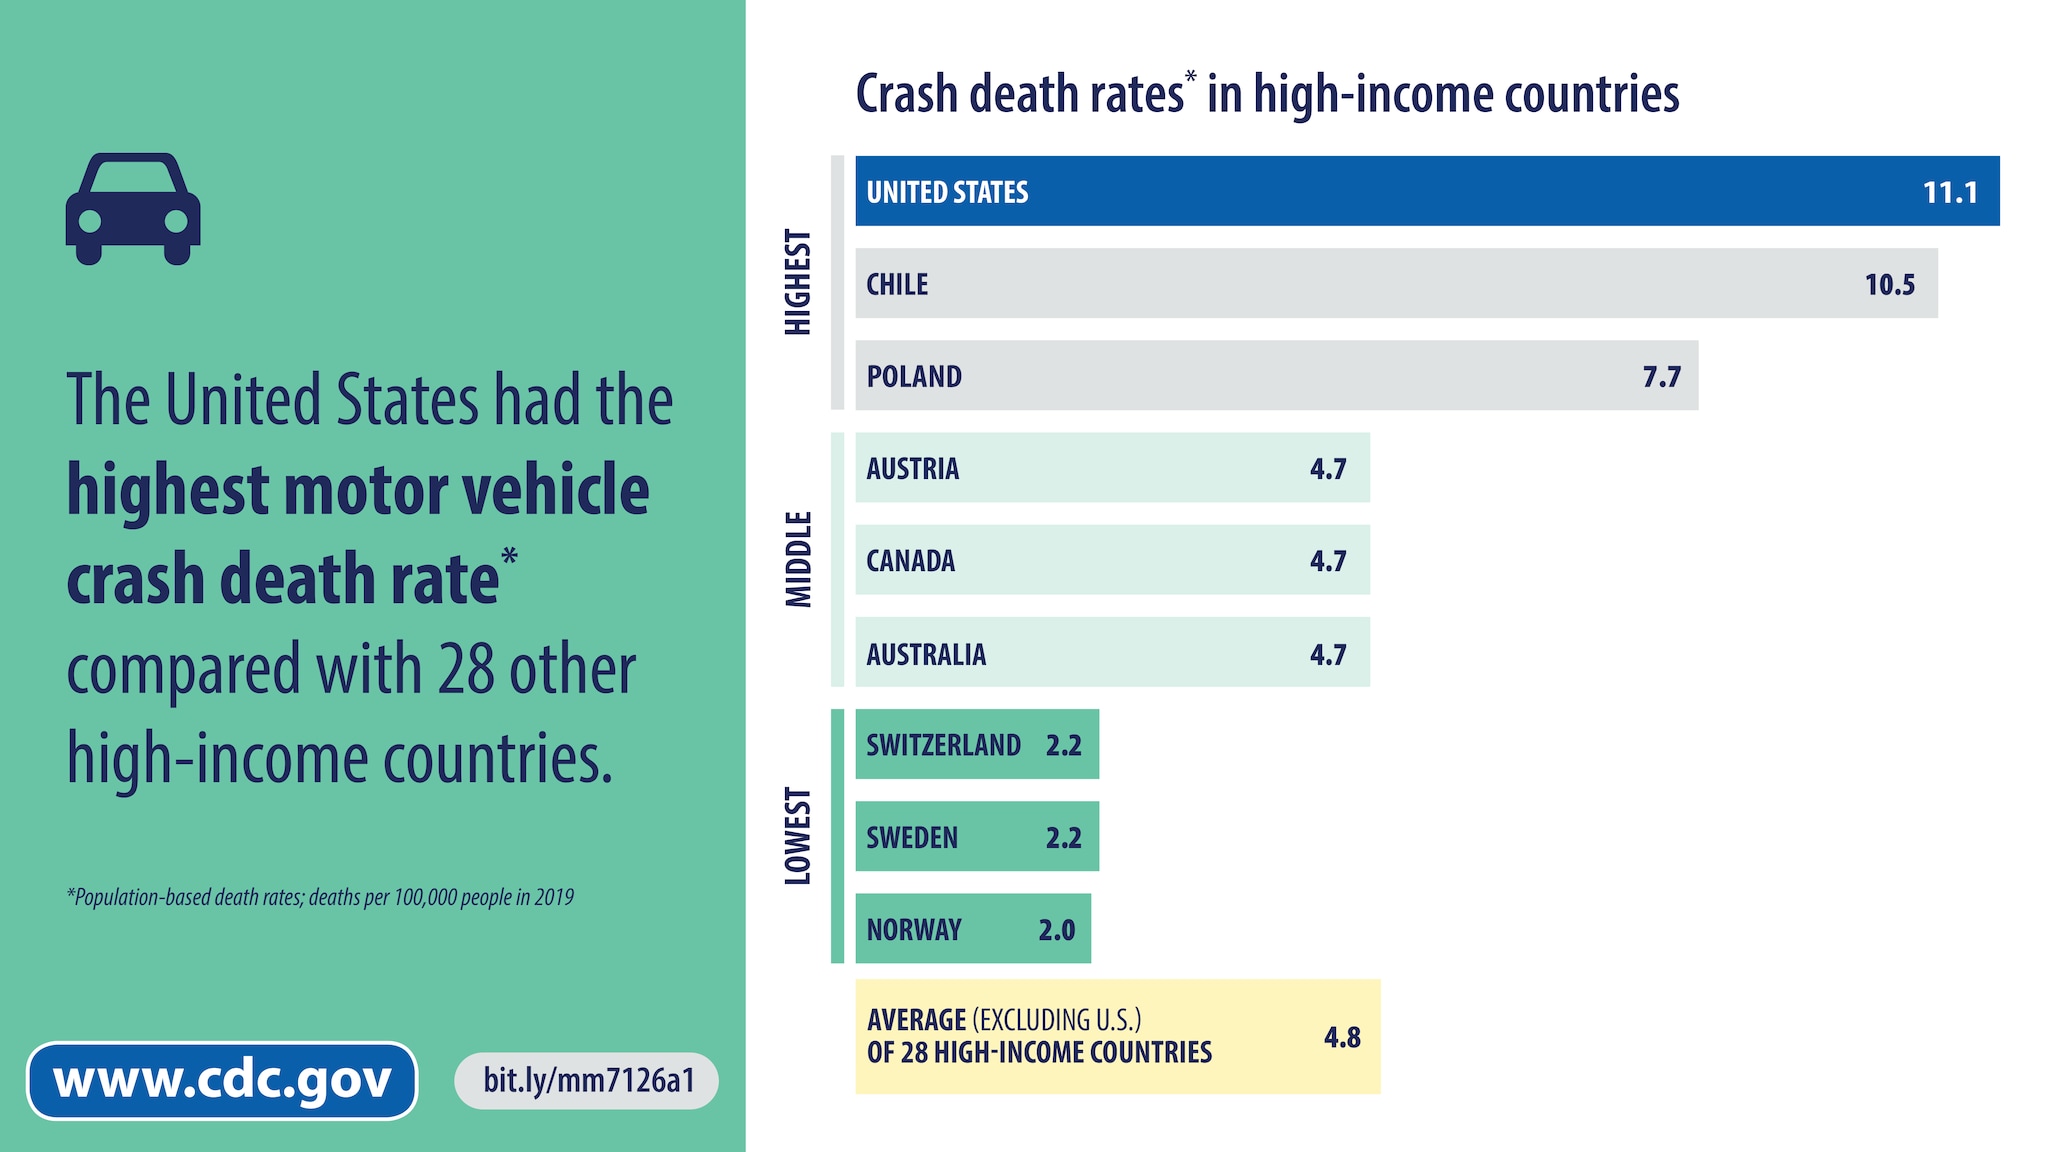 Chart of crash death rates in high-income countries, with the United States having the highest